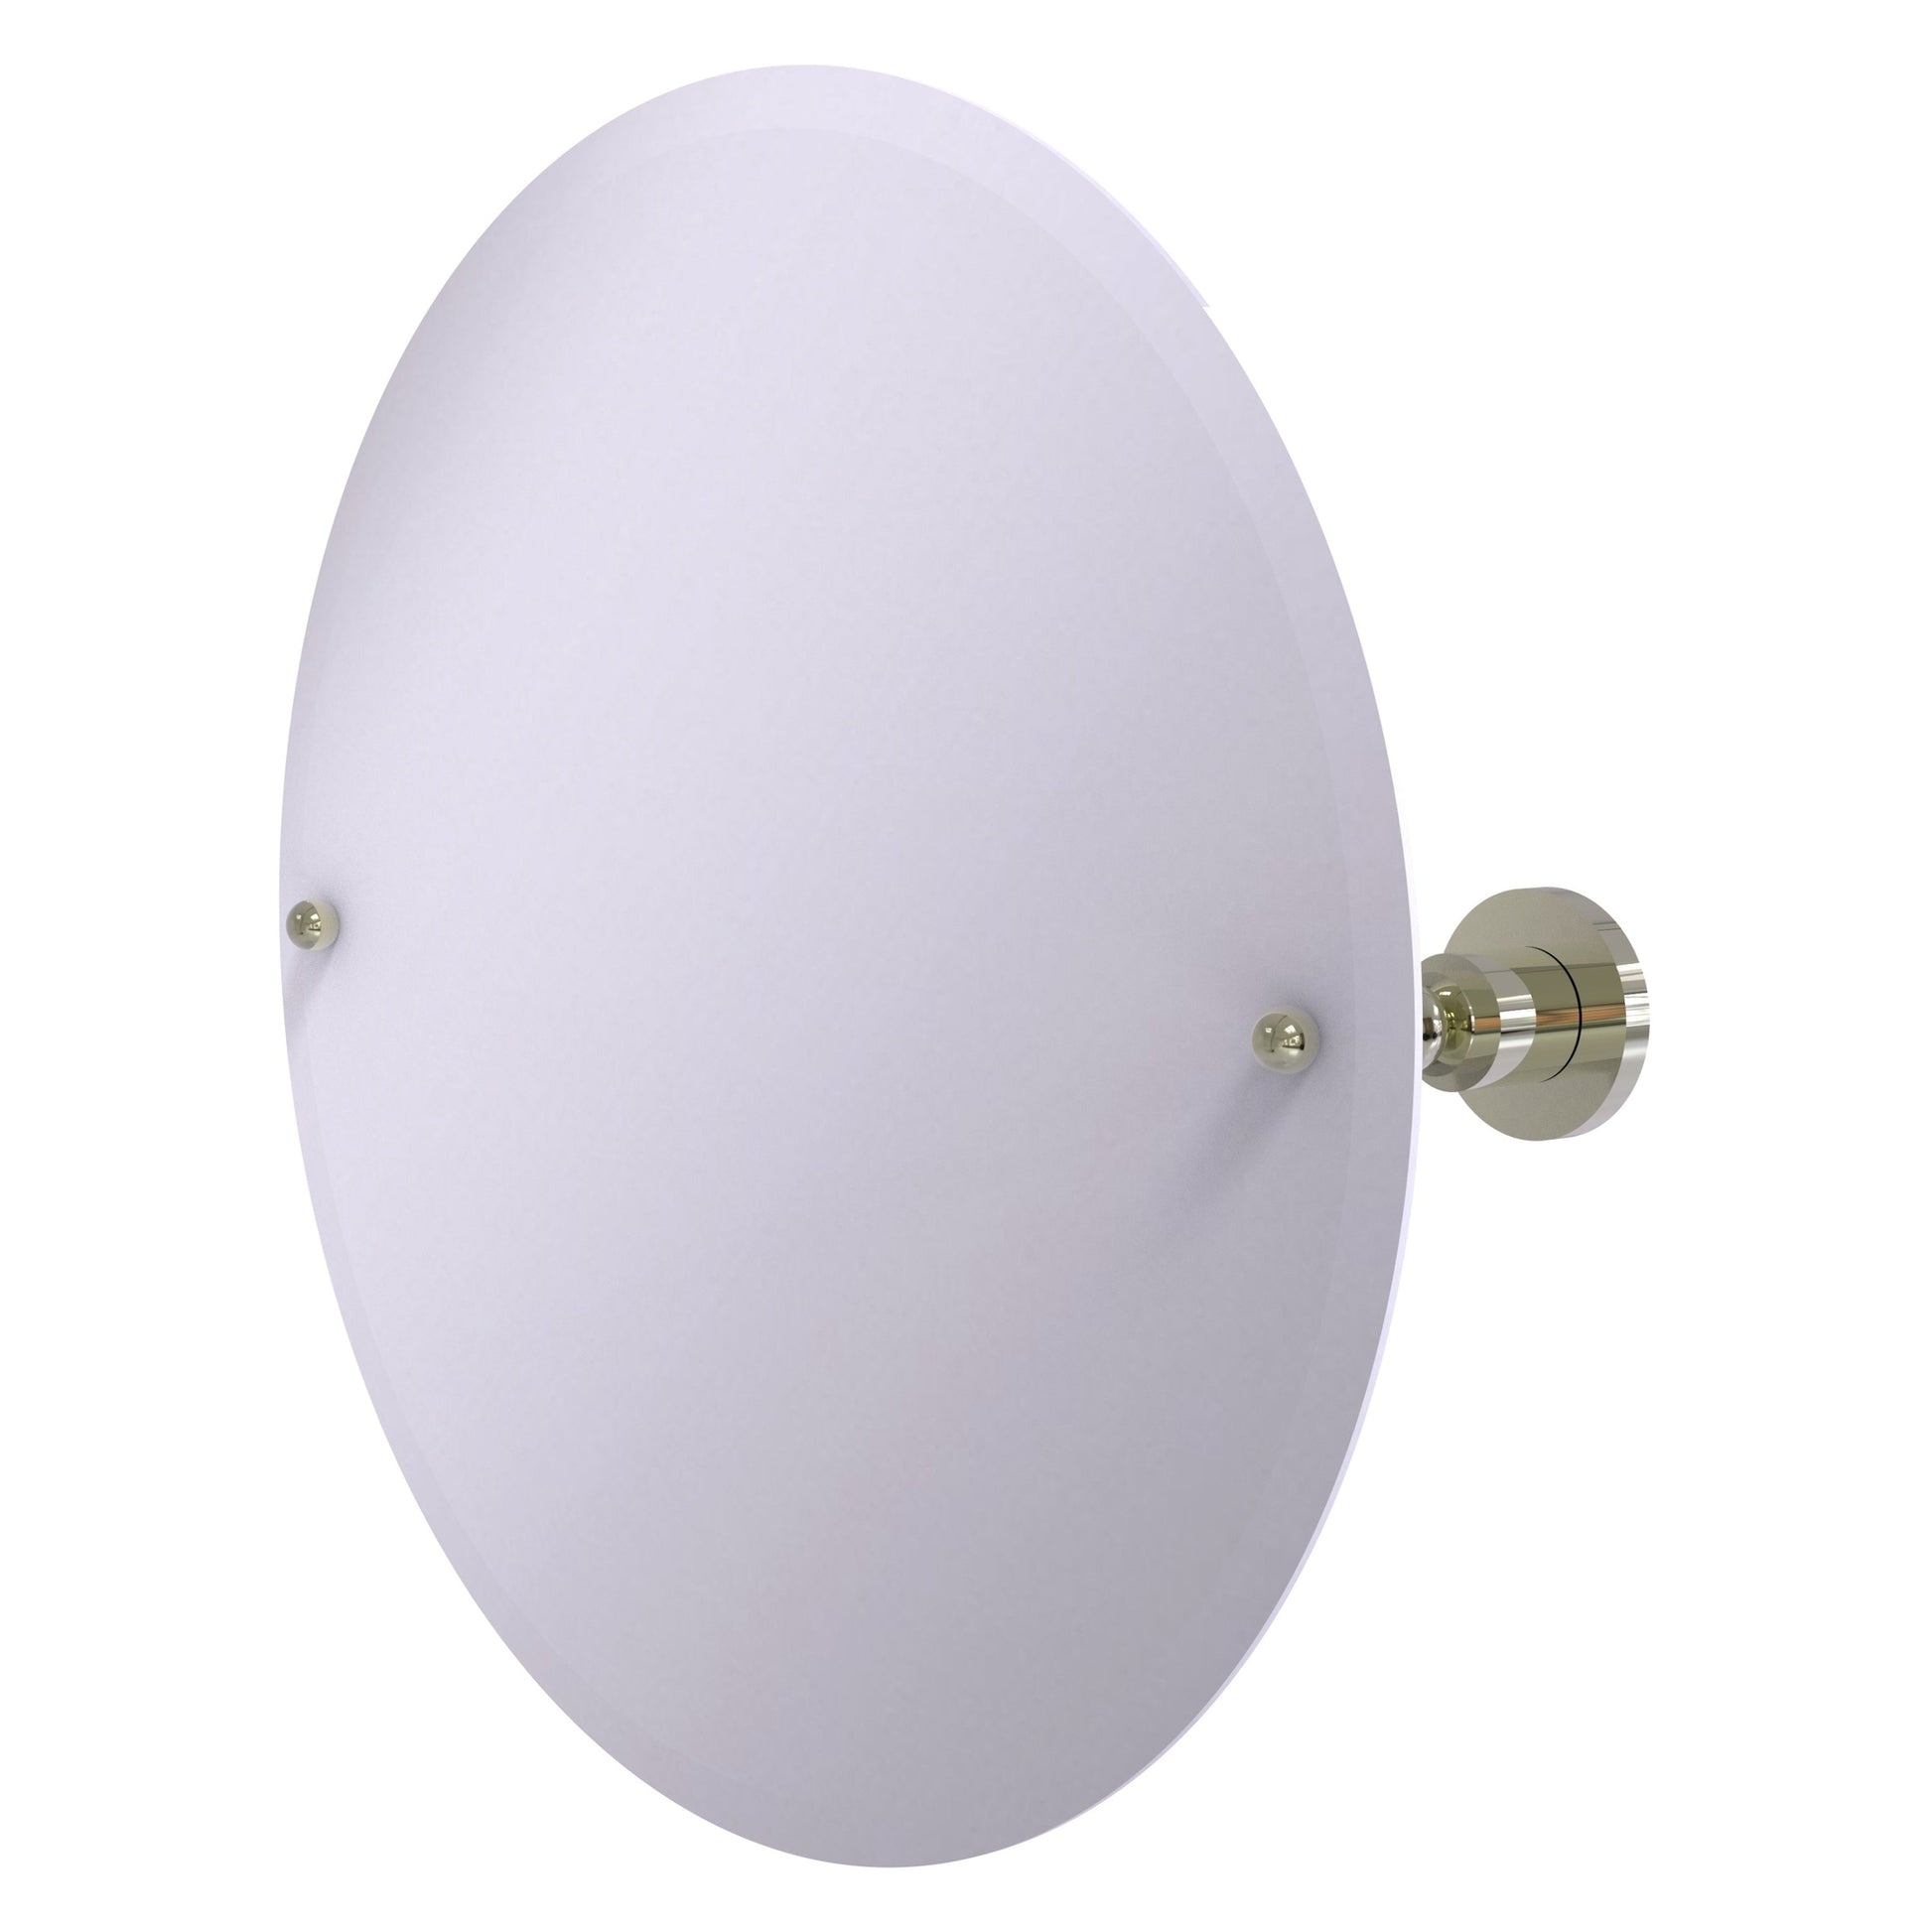 Allied Brass Astor Place 22" x 22" Polished Nickel Solid Brass Frameless Round Tilt Mirror With Beveled Edge